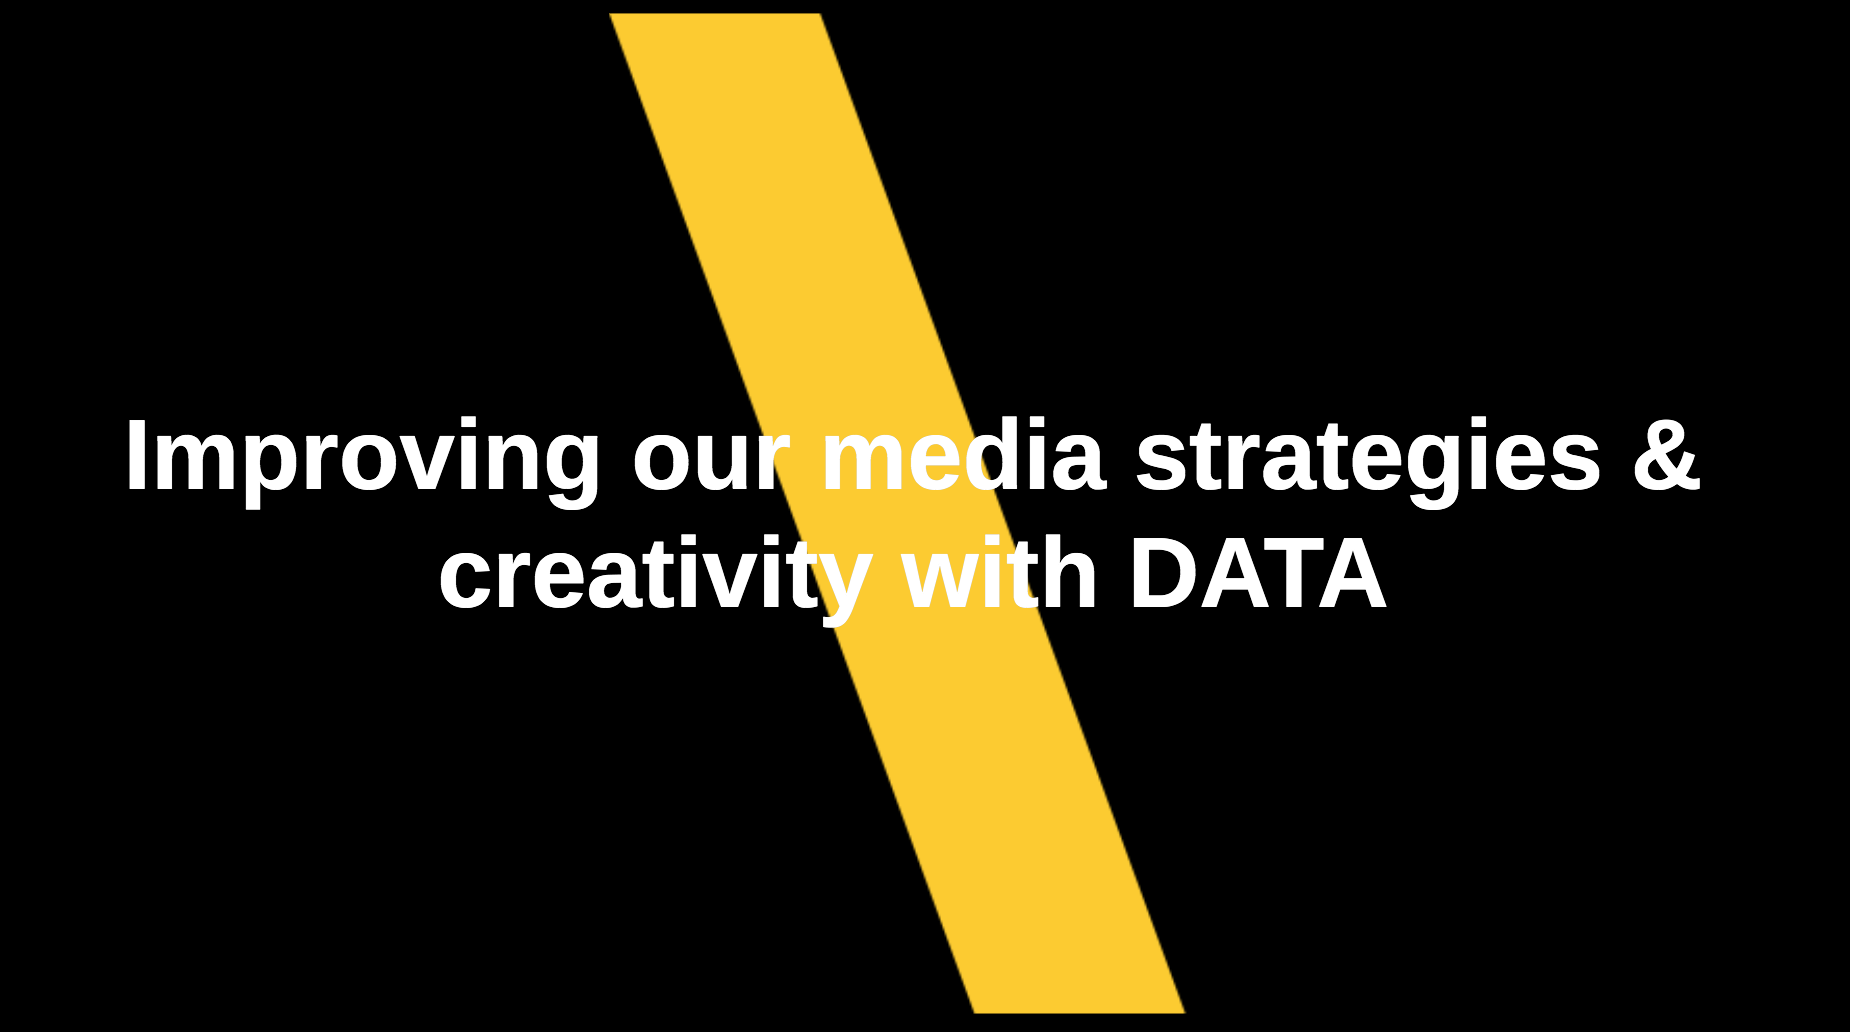 Improving our media strategies & creativity with DATA